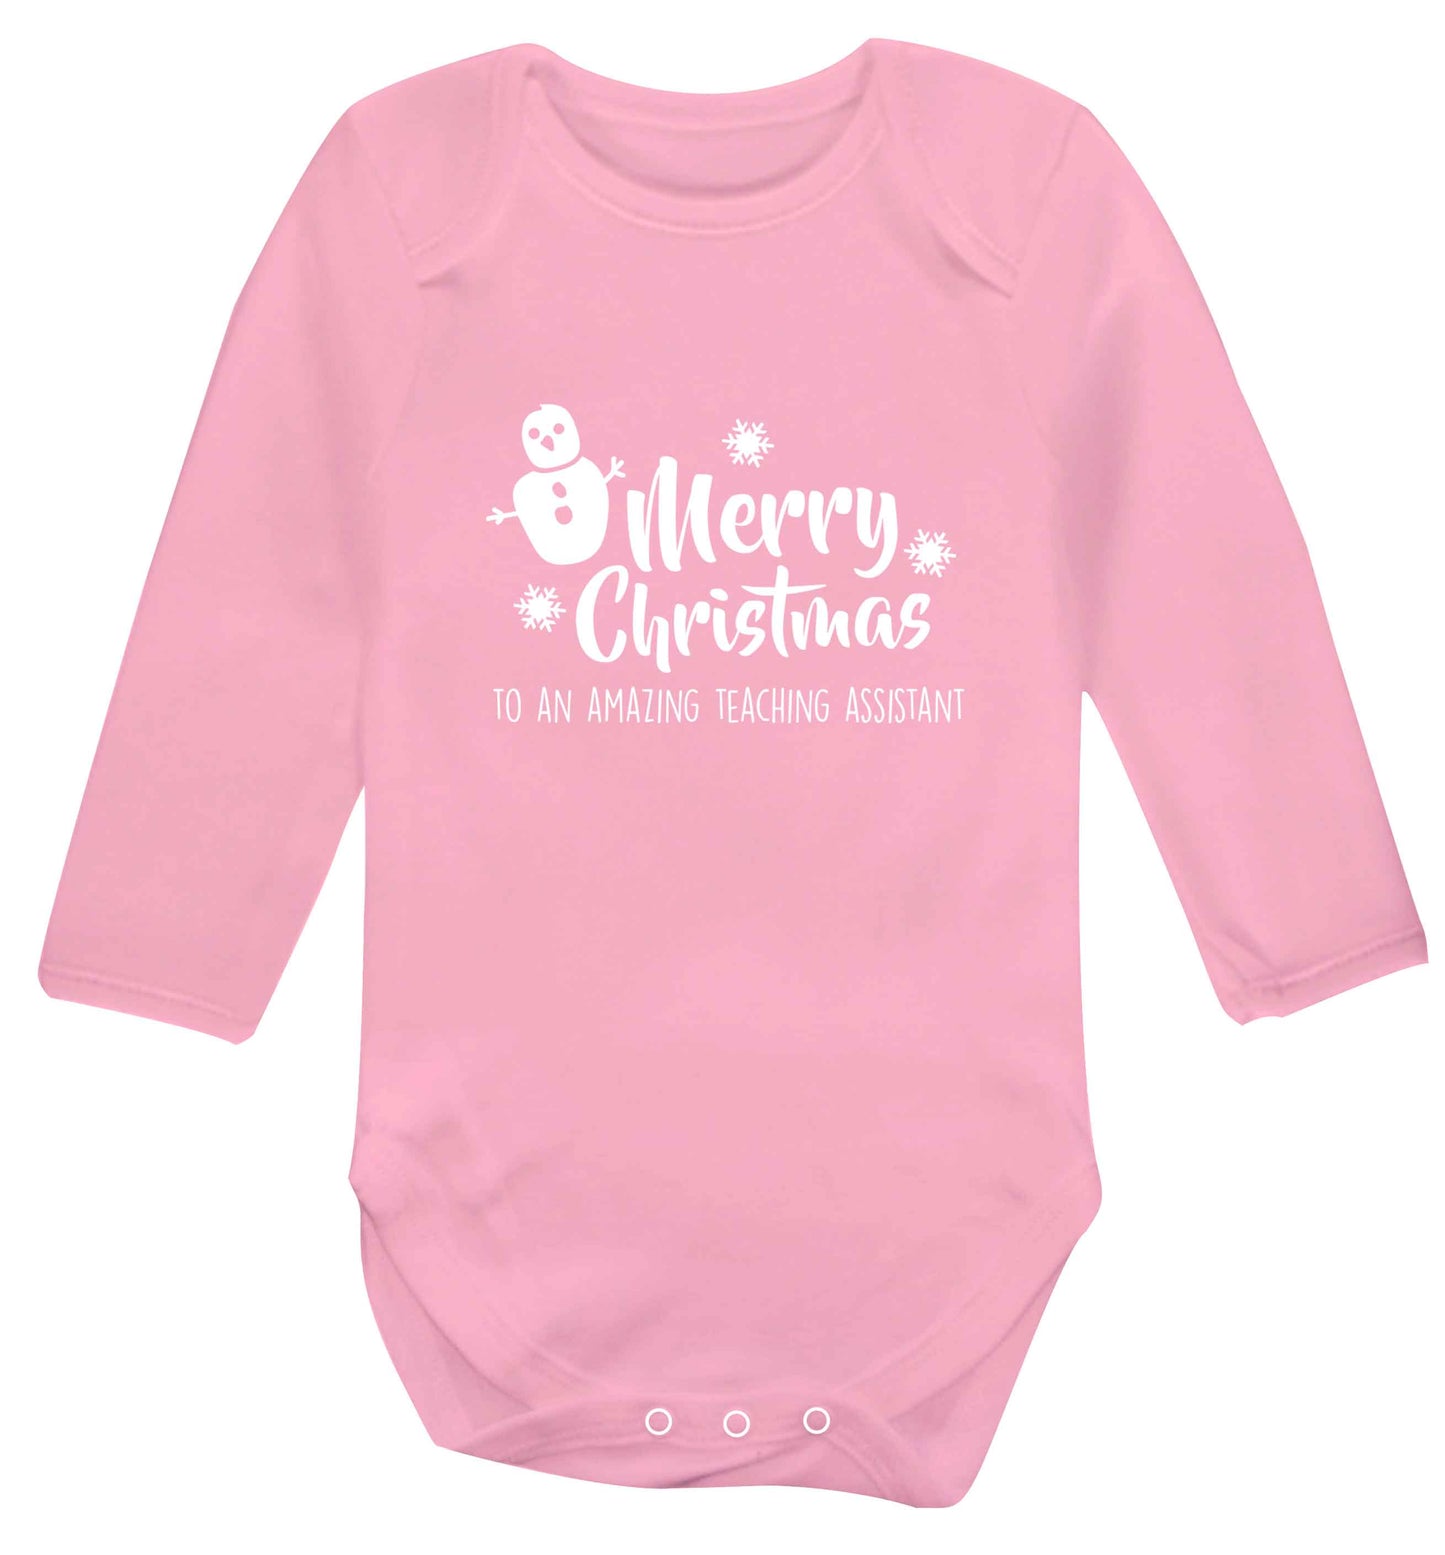 Merry christmas to my teacher baby vest long sleeved pale pink 6-12 months